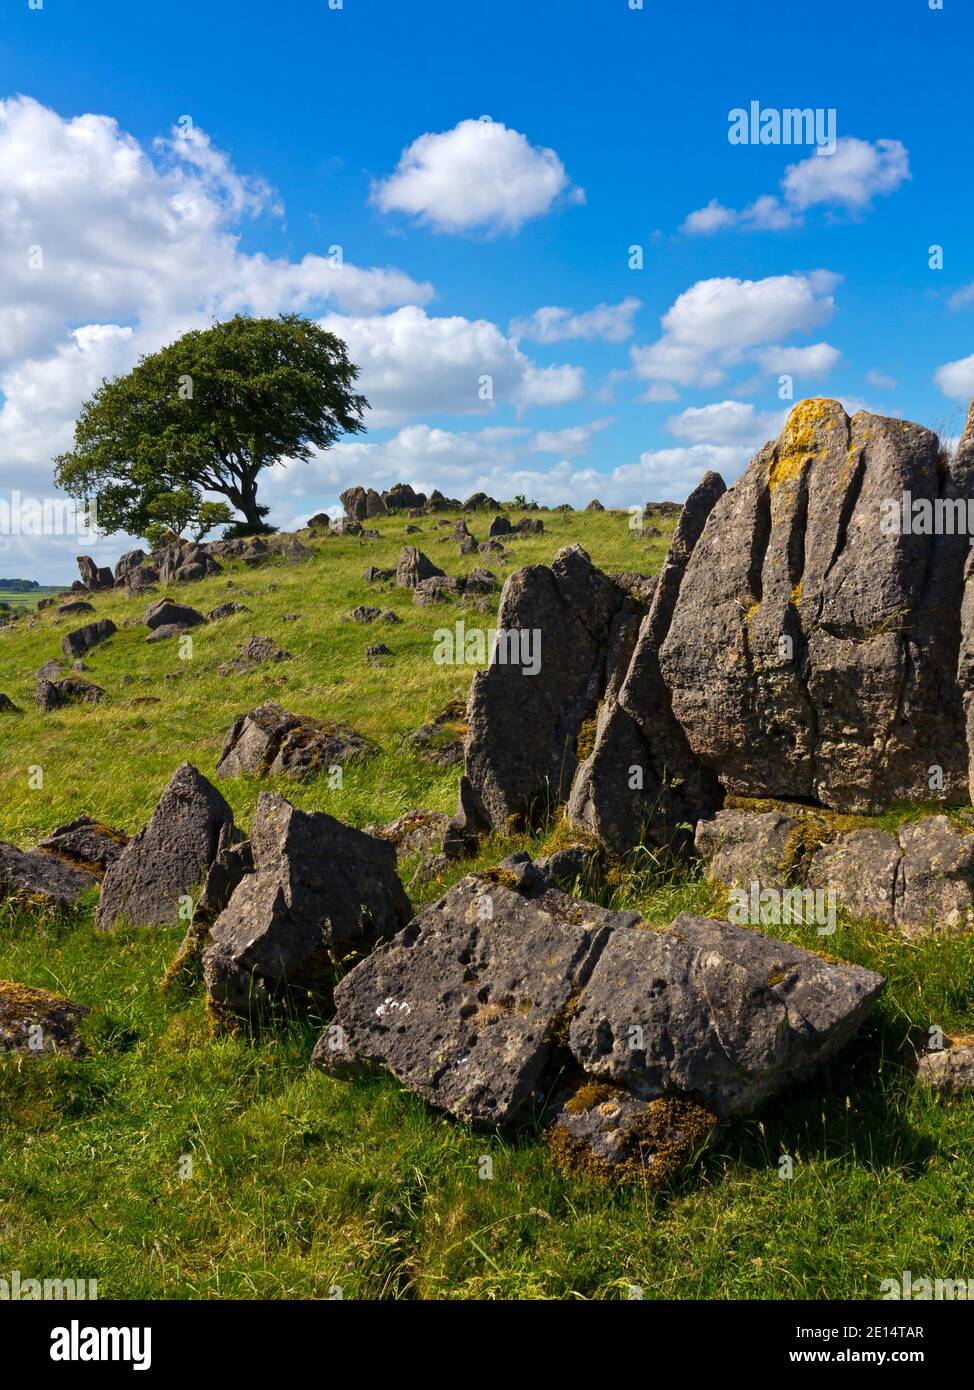 Limestone rocks and tree at Roystone Rocks near Parwich in the Peak District National Park Derbyshire Dales England UK Stock Photo